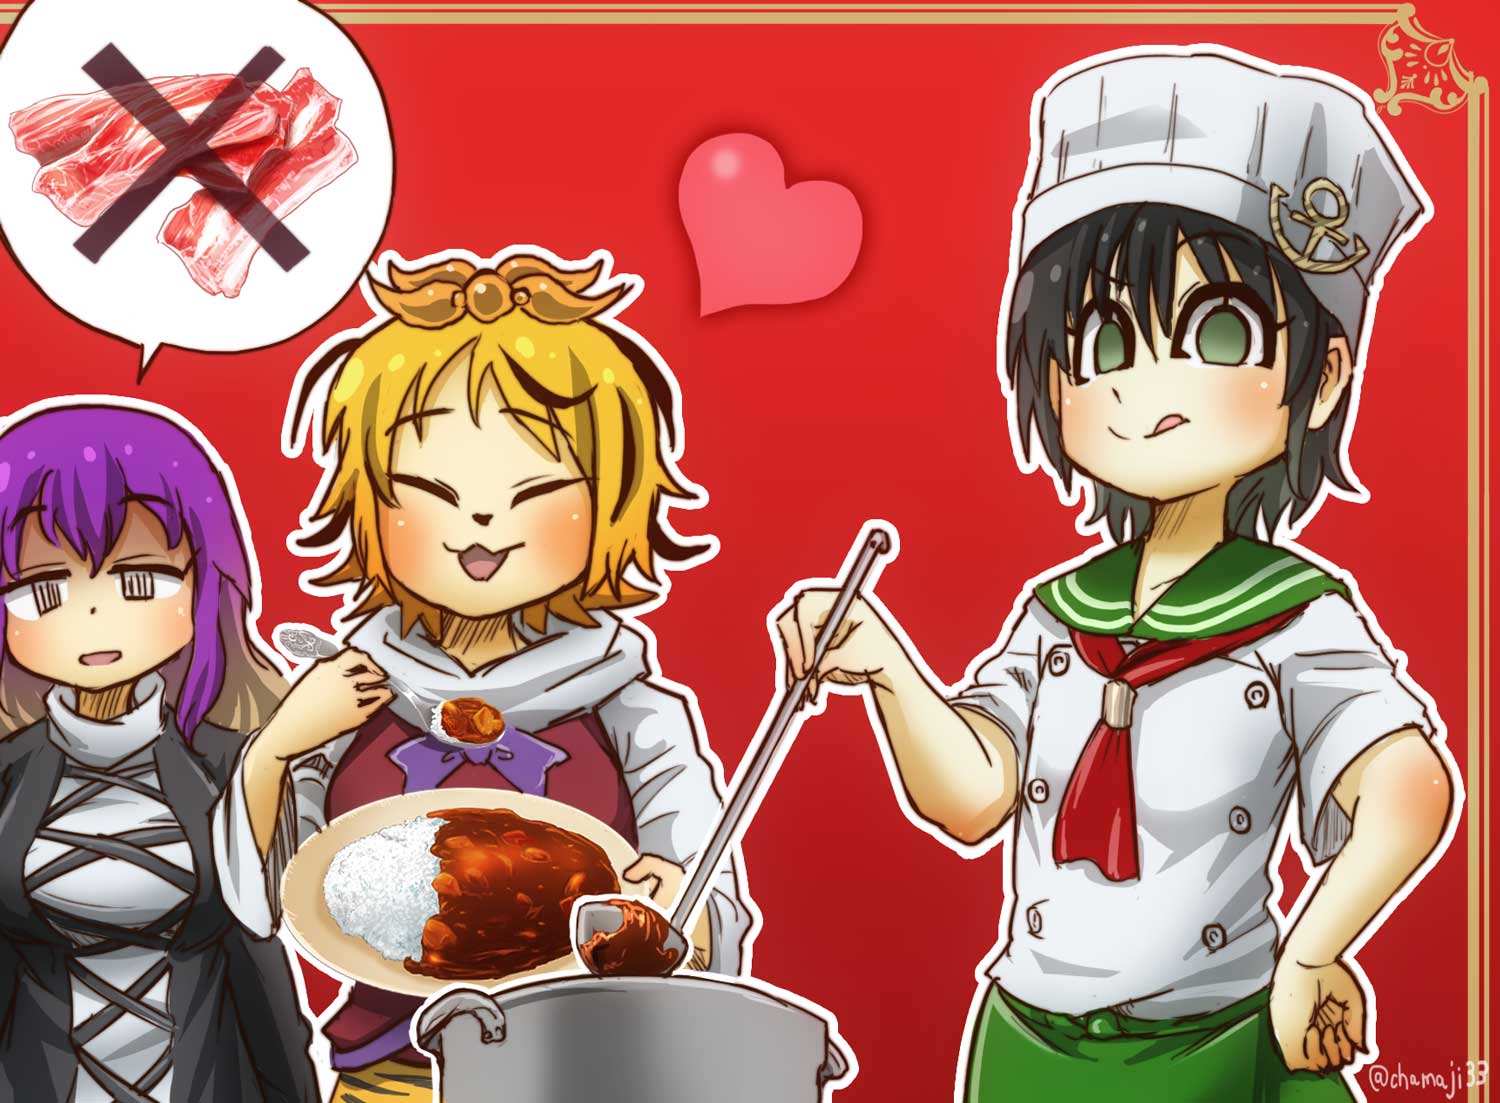 3girls :3 anchor_symbol apron ascot black_hair blonde_hair border brown_hair buttons chamaji chef_hat chef_uniform closed_eyes commentary_request crossed_out curry curry_rice dress eyebrows_visible_through_hair food gradient_hair green_eyes hair_between_eyes hand_on_hip hat heart hijiri_byakuren ladle layered_dress long_hair long_sleeves meat multicolored_hair multiple_girls murasa_minamitsu neck_ribbon open_mouth plate pot purple_hair ribbon rice sailor_collar short_hair short_sleeves simple_background speech_bubble spoon tongue tongue_out toramaru_shou touhou twitter_username